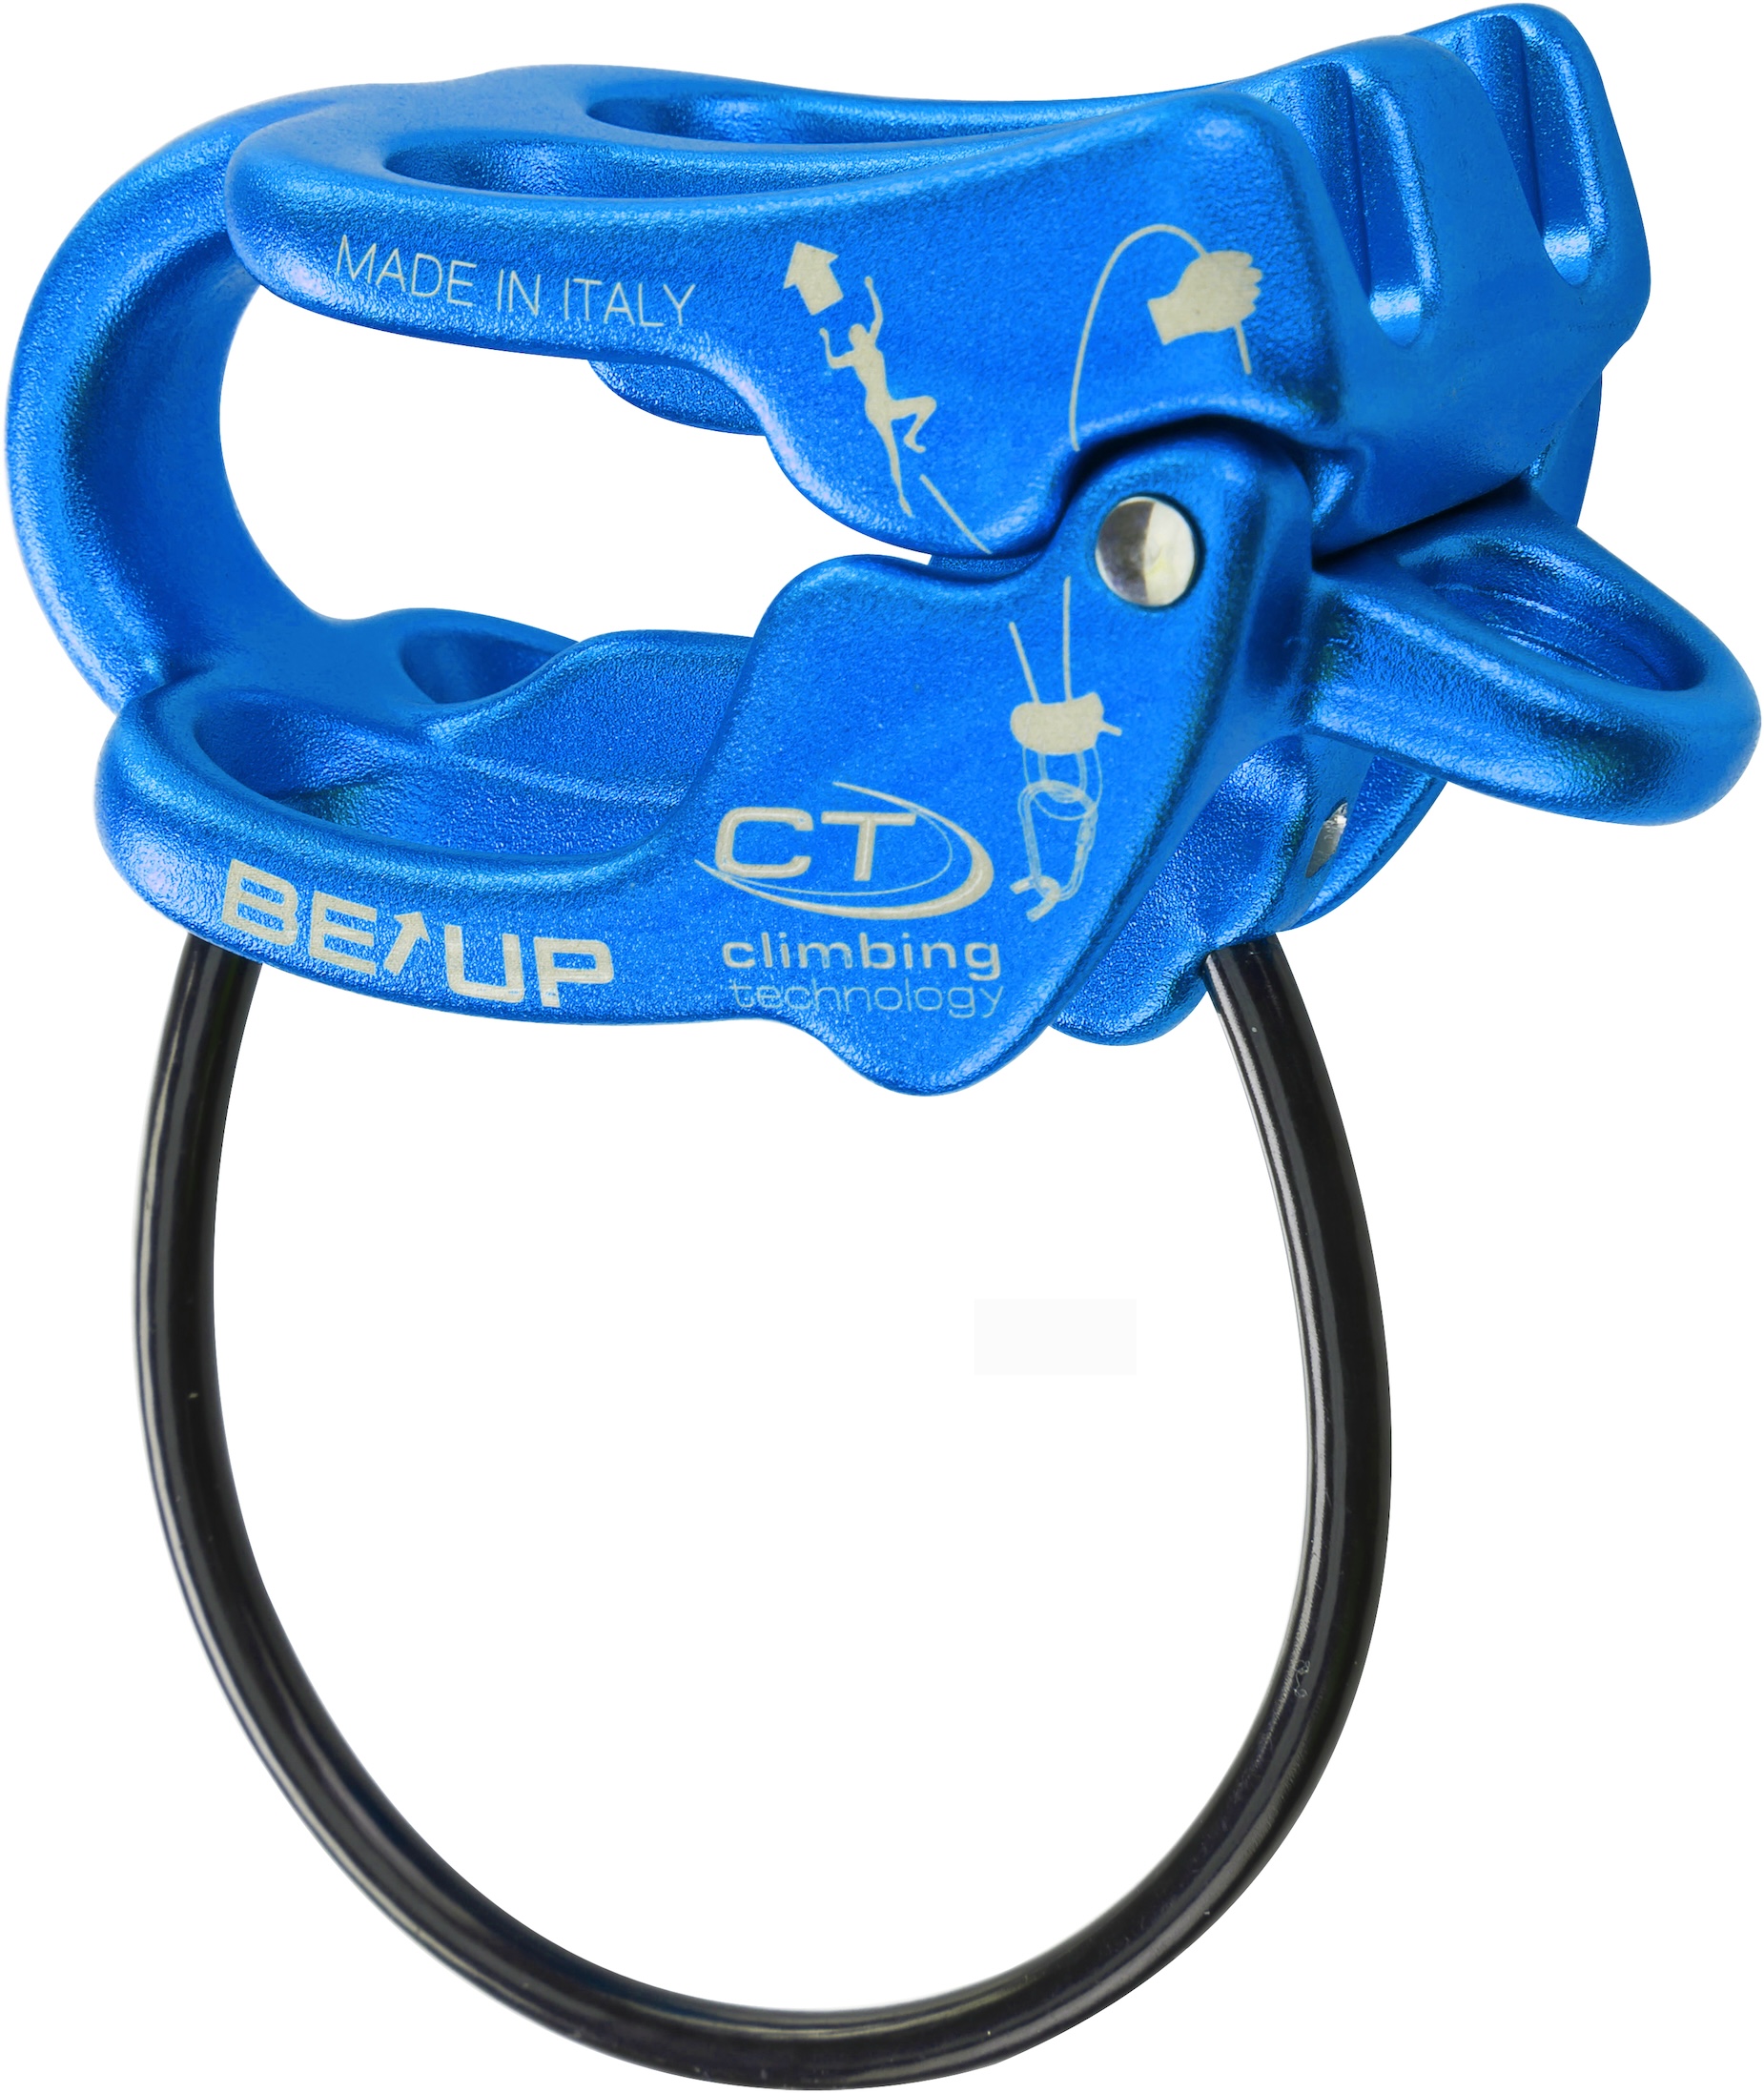 BE UP by Climbing Technology